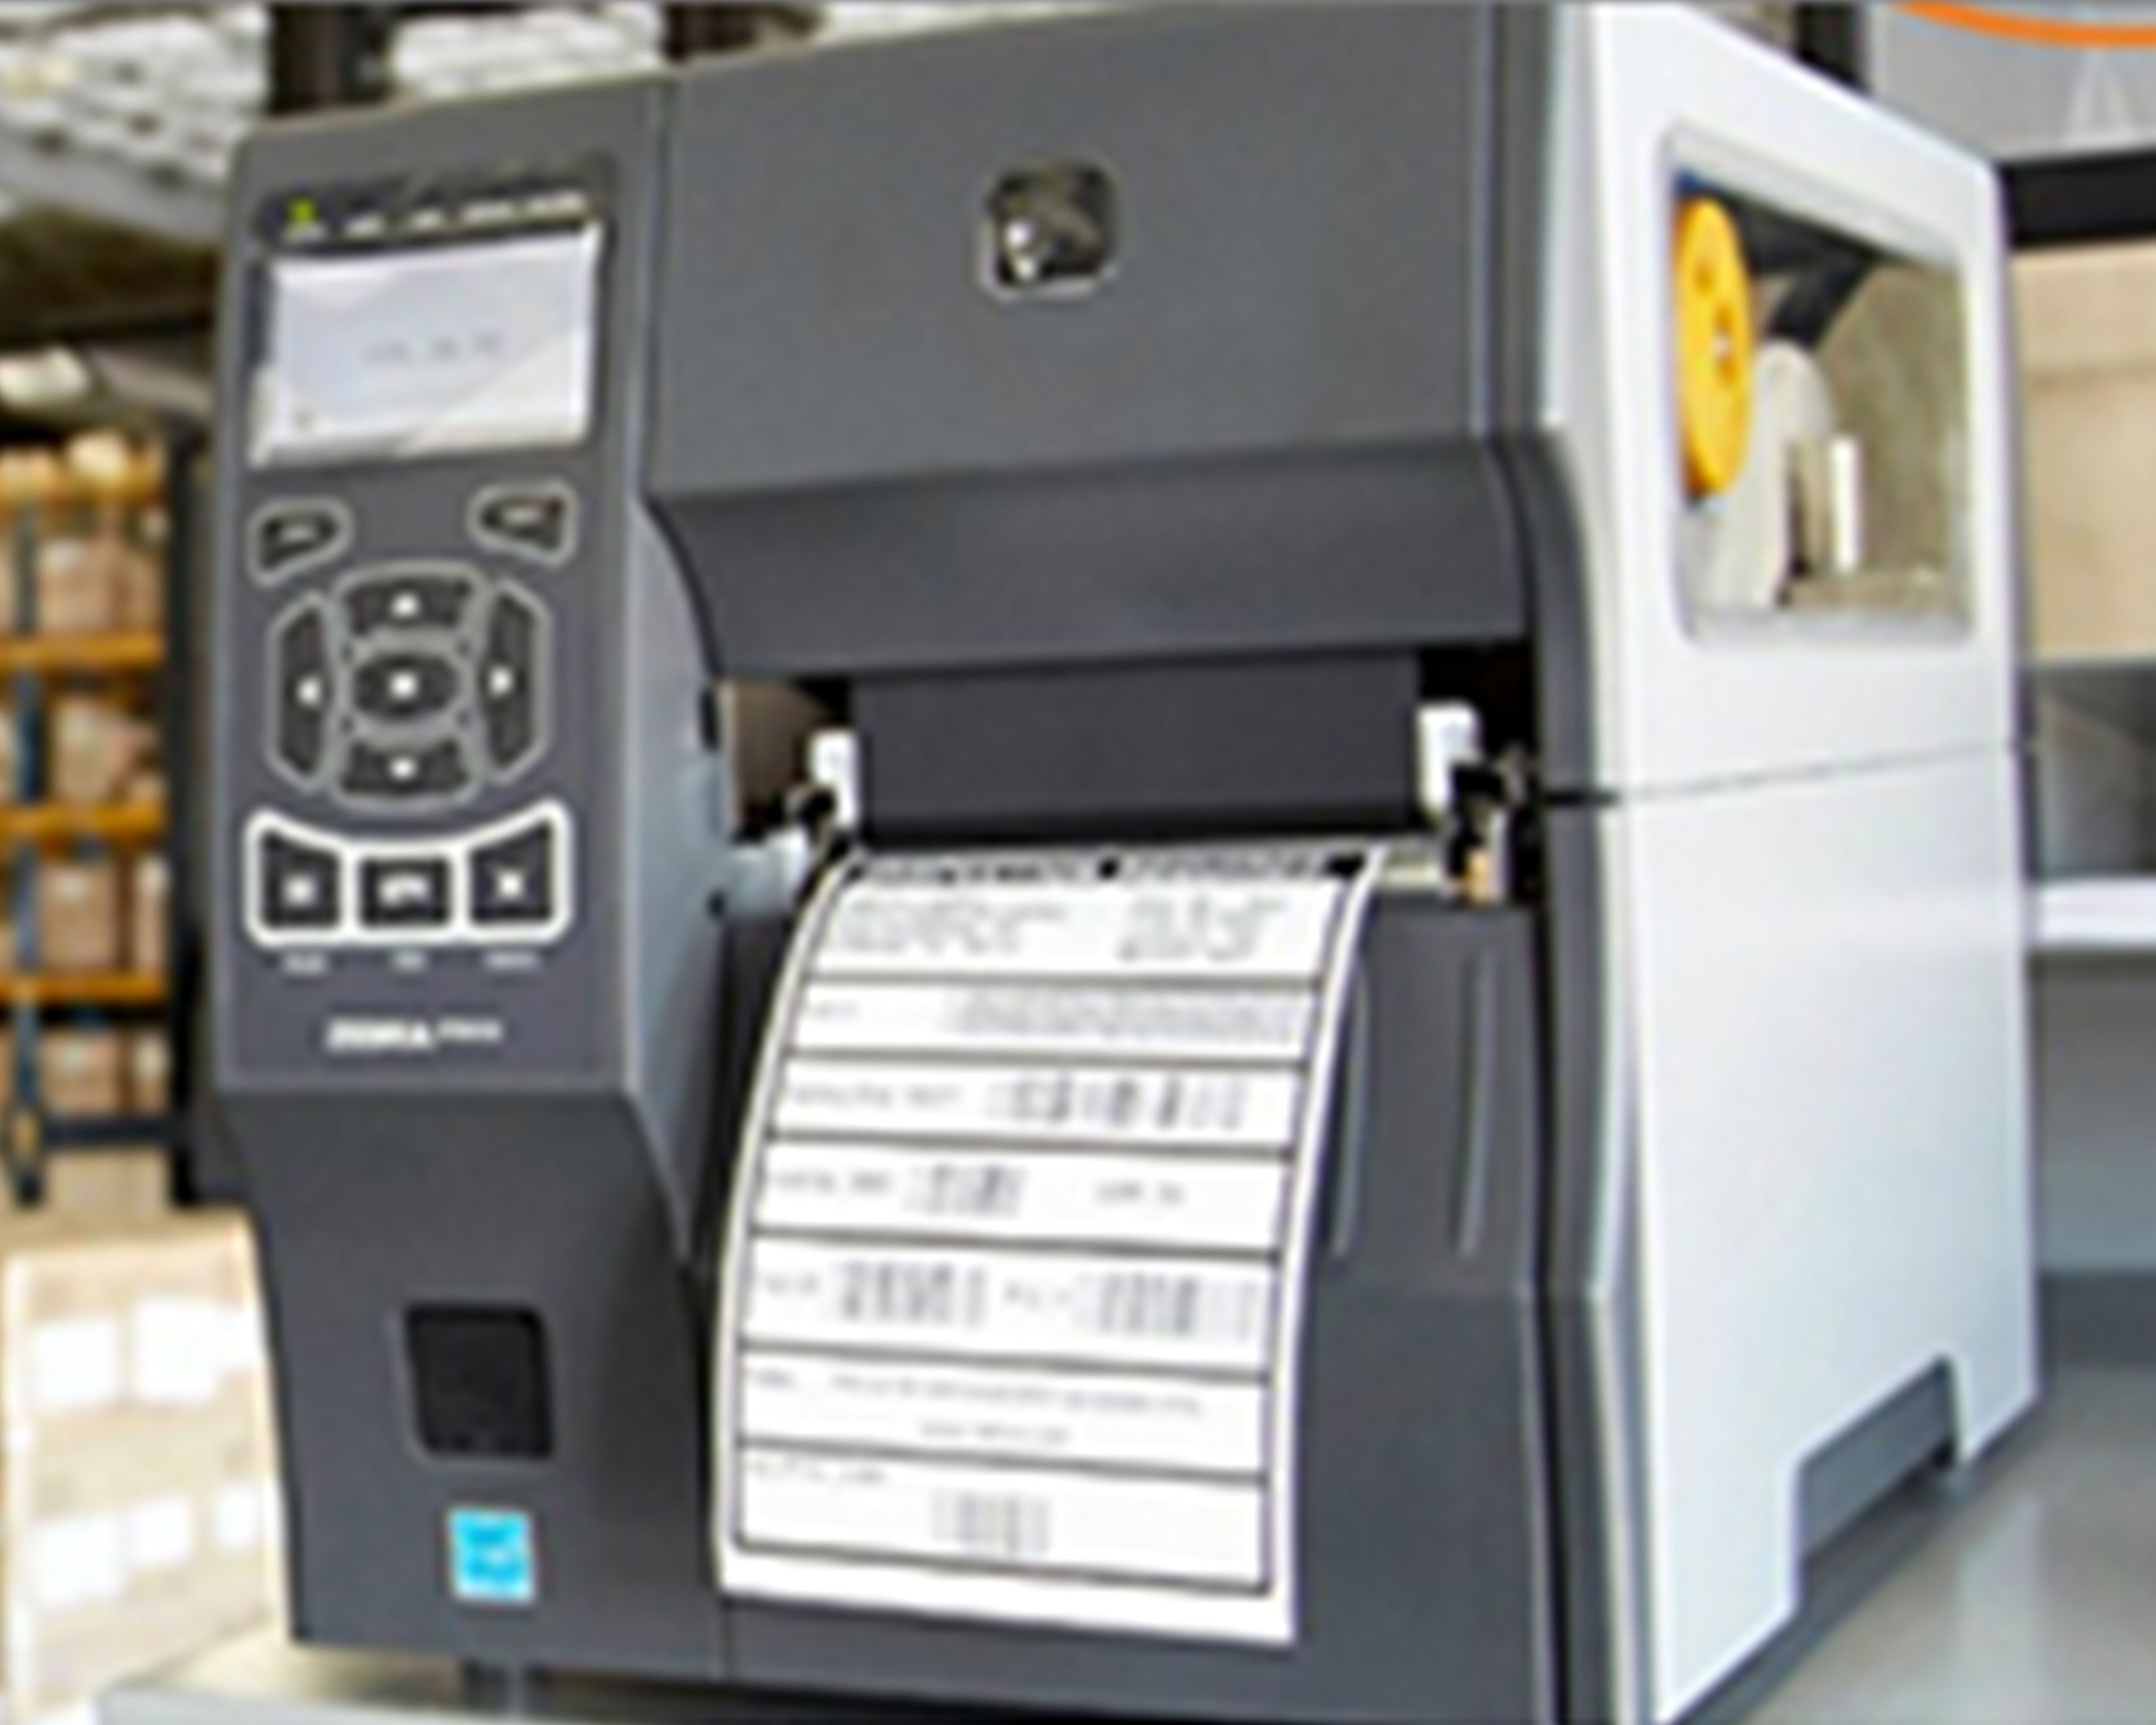 Zebra ZT200 industrial printer prints barcode labels for better warehouse visibility